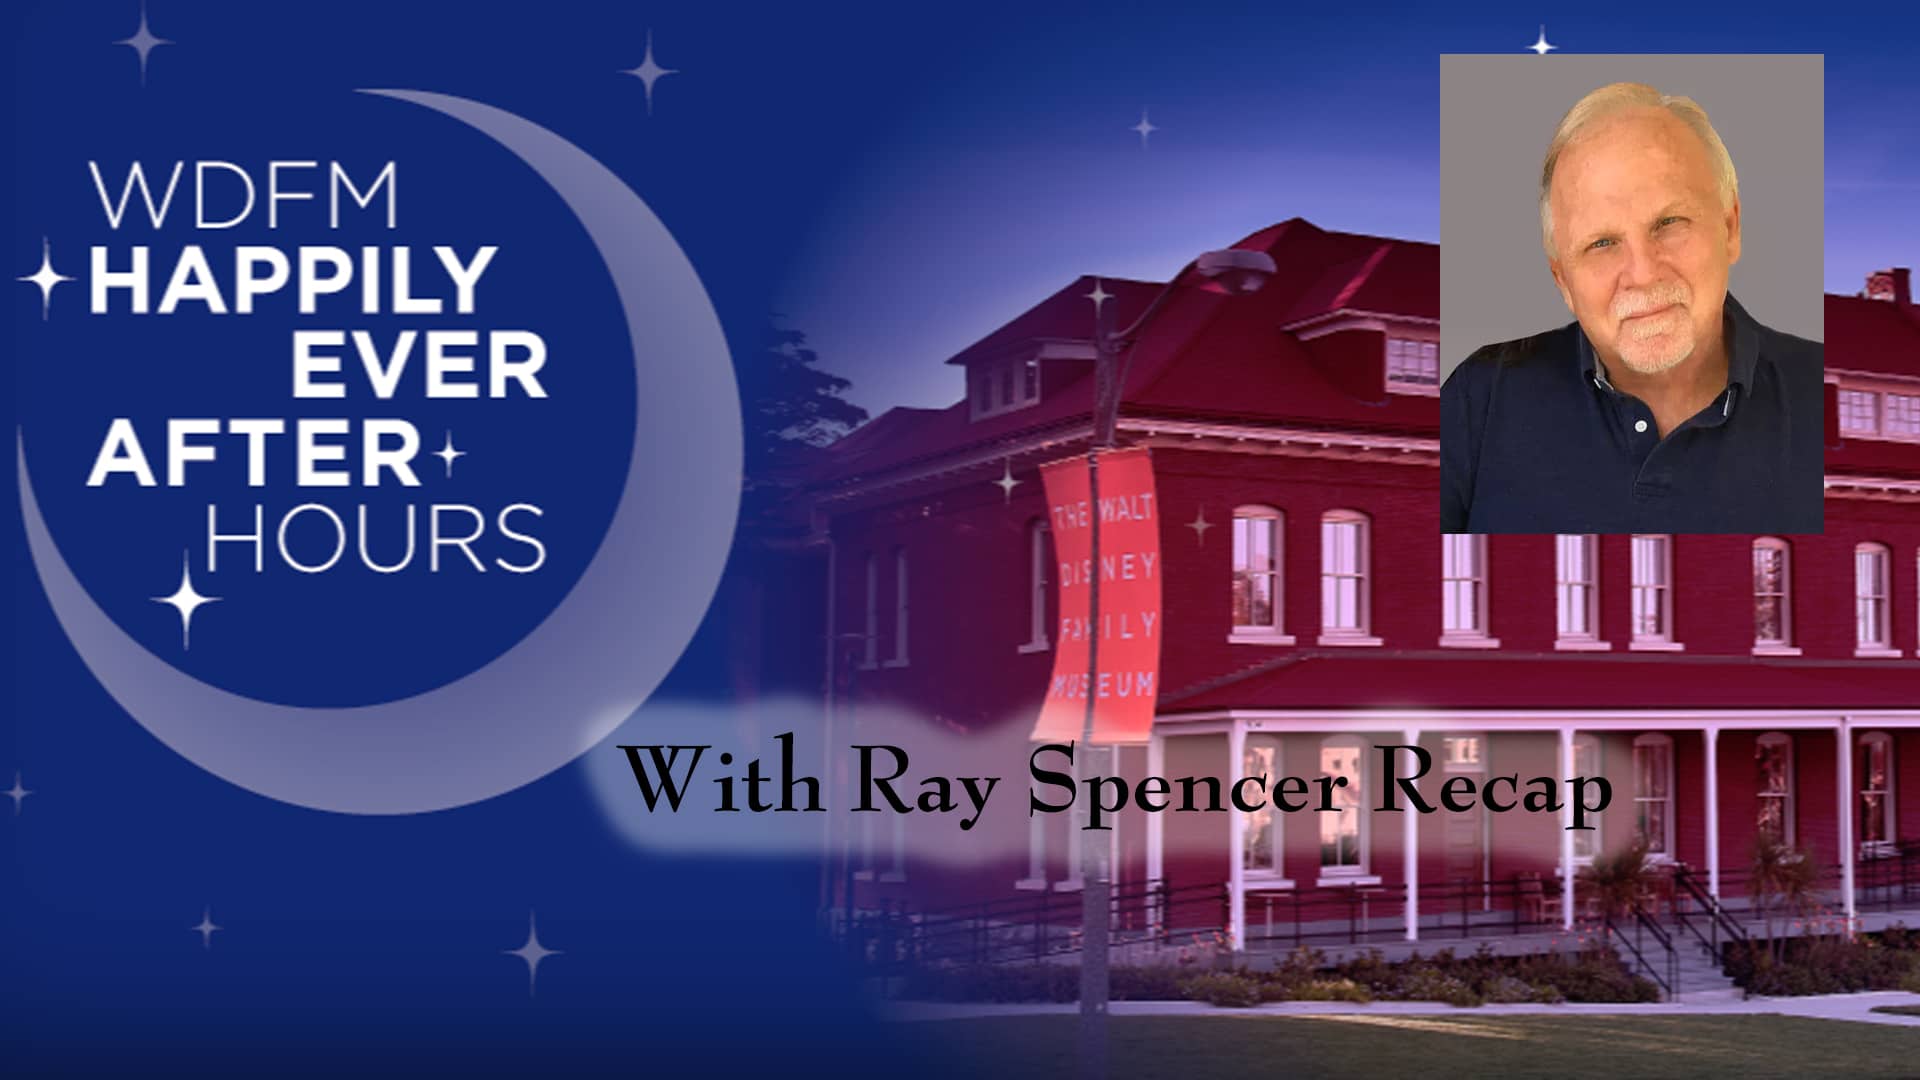 A Recap of Walt Disney Family Museum’s Happily Ever After Hours with Imagineer Ray Spencer